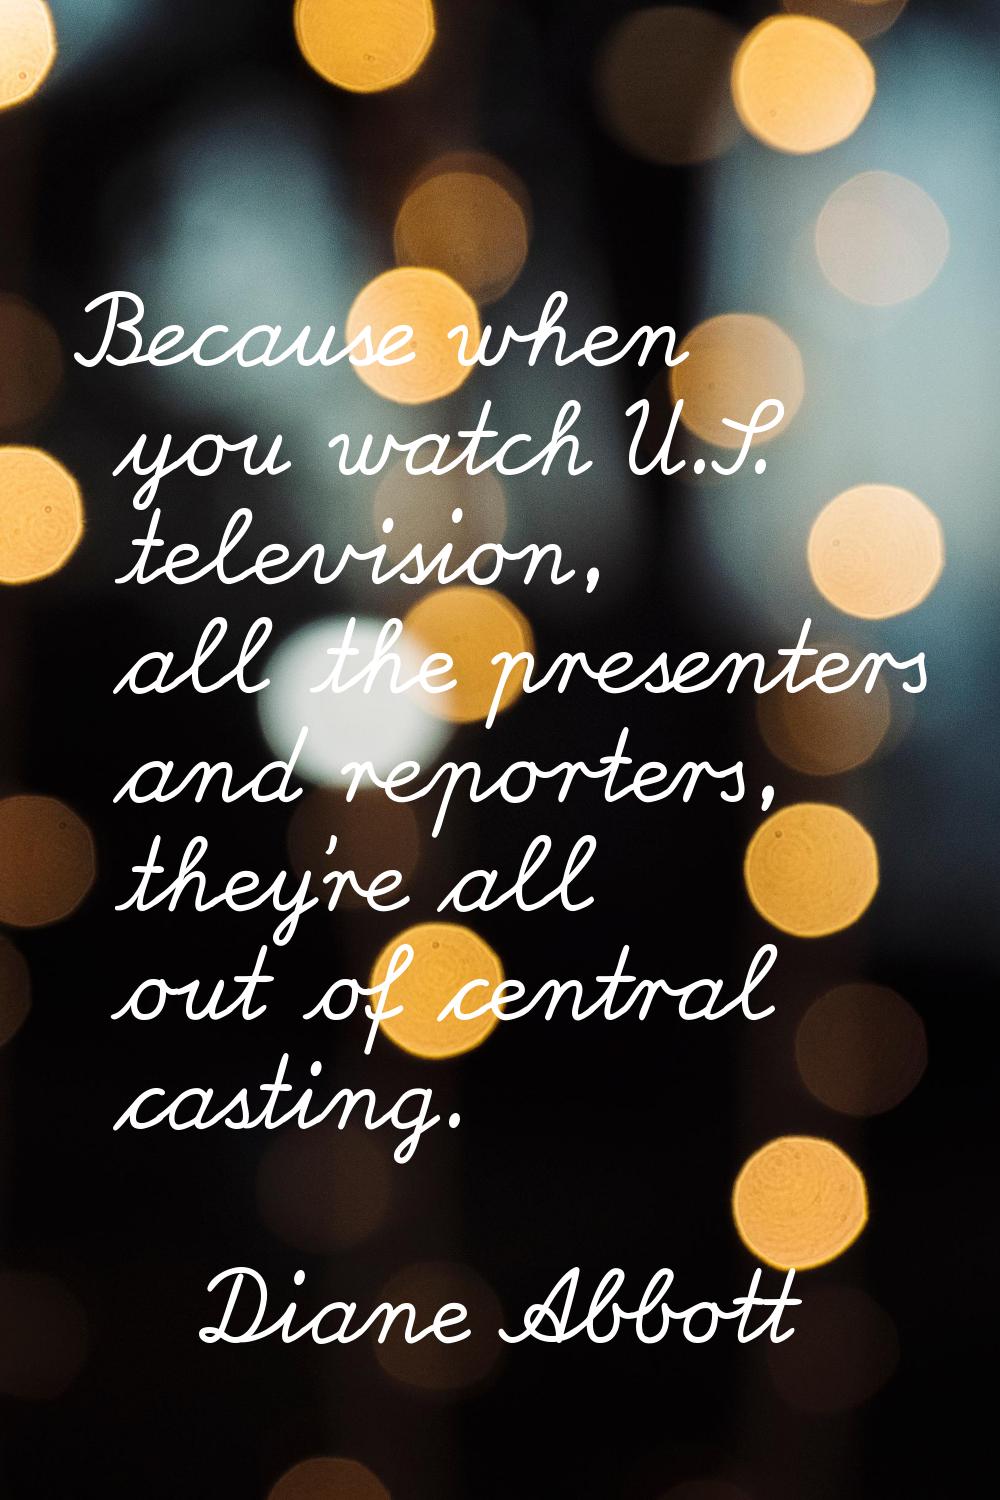 Because when you watch U.S. television, all the presenters and reporters, they're all out of centra